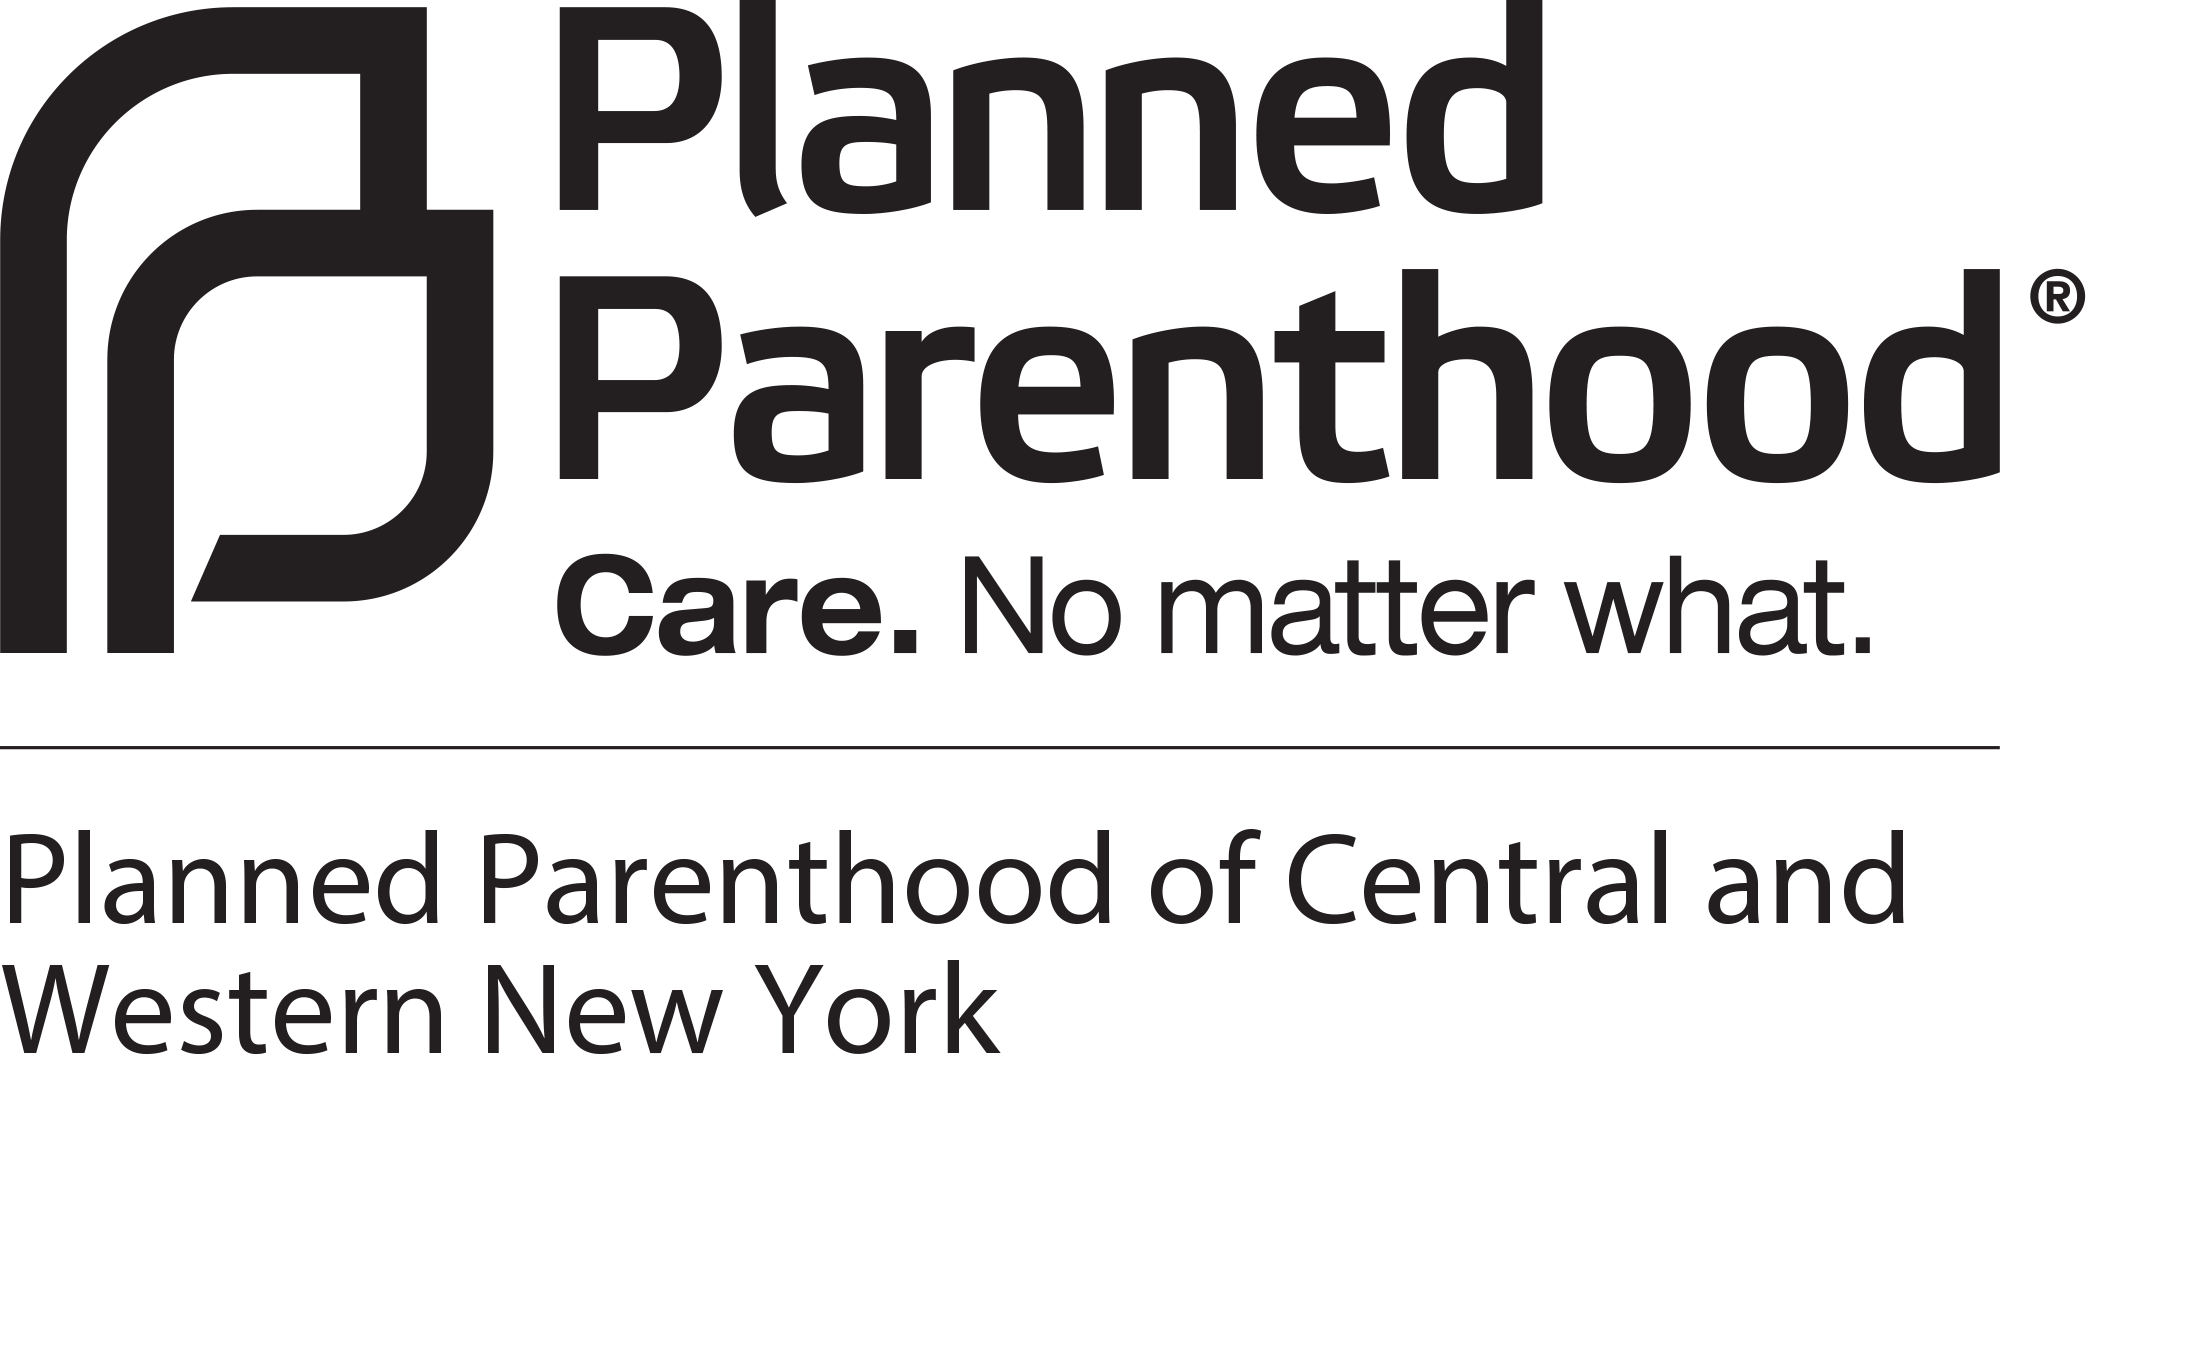 Planned Parenthood of Central & Western NY